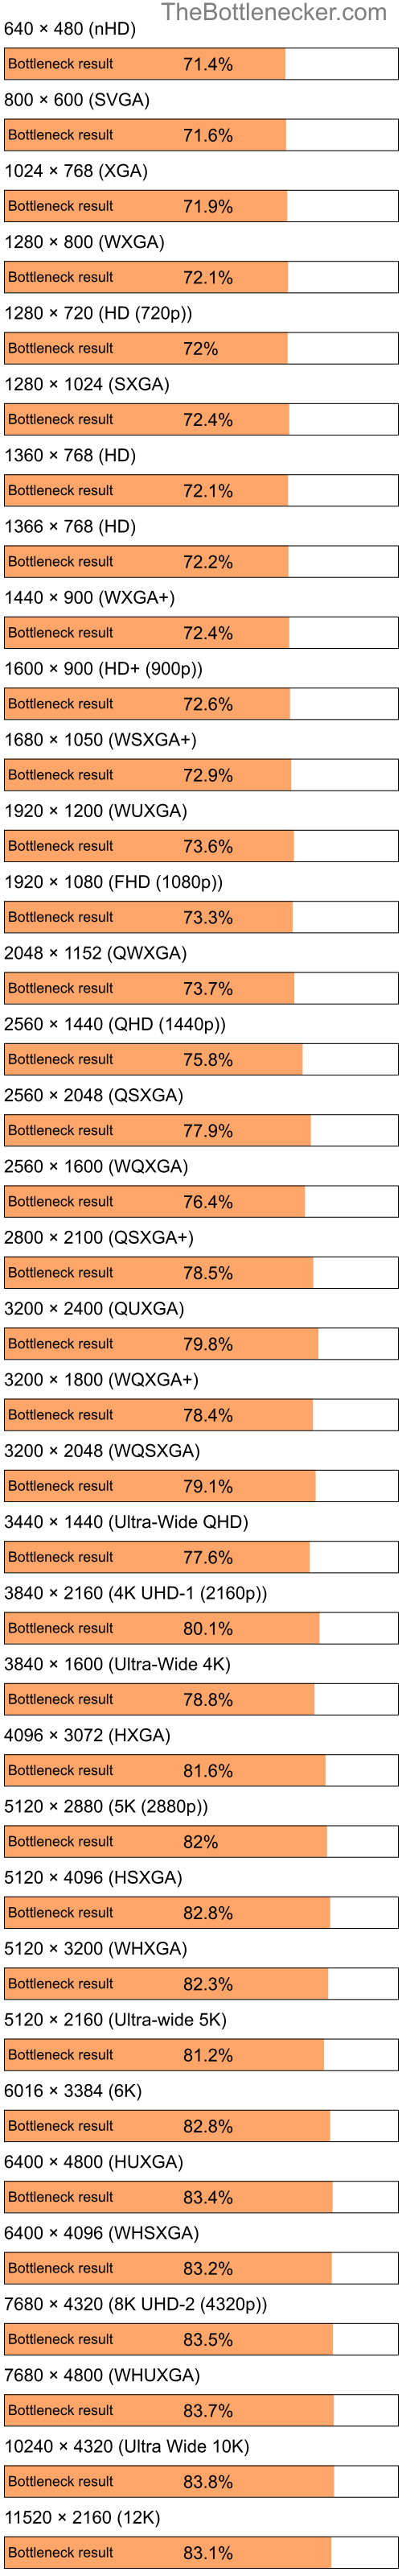 Bottleneck results by resolution for Intel Atom Z520 and NVIDIA Quadro NVS 135M in General Tasks